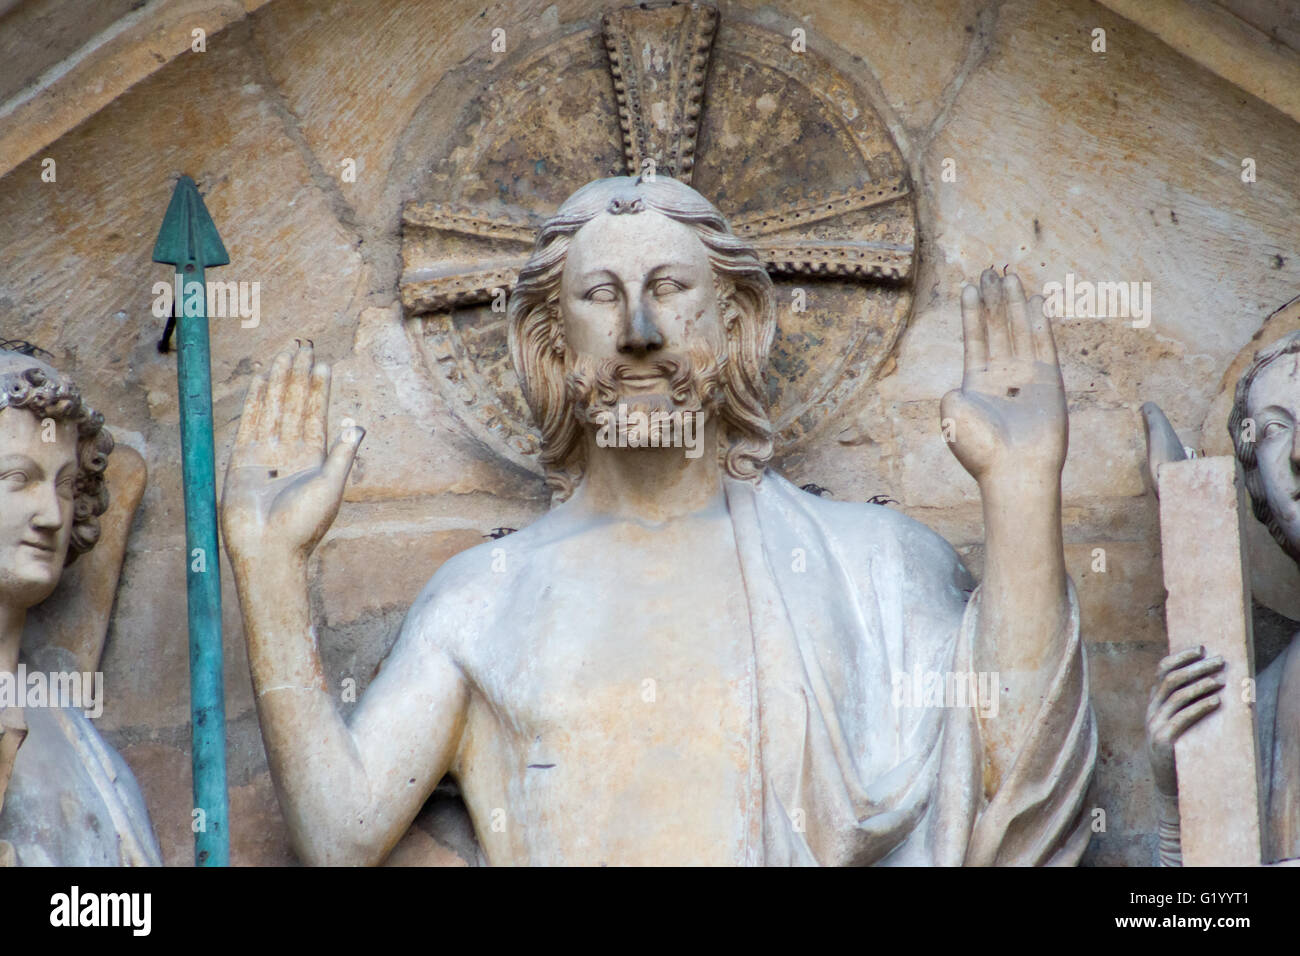 Portal of the Last Judgment, the central portal of Notre Dame. Stock Photo